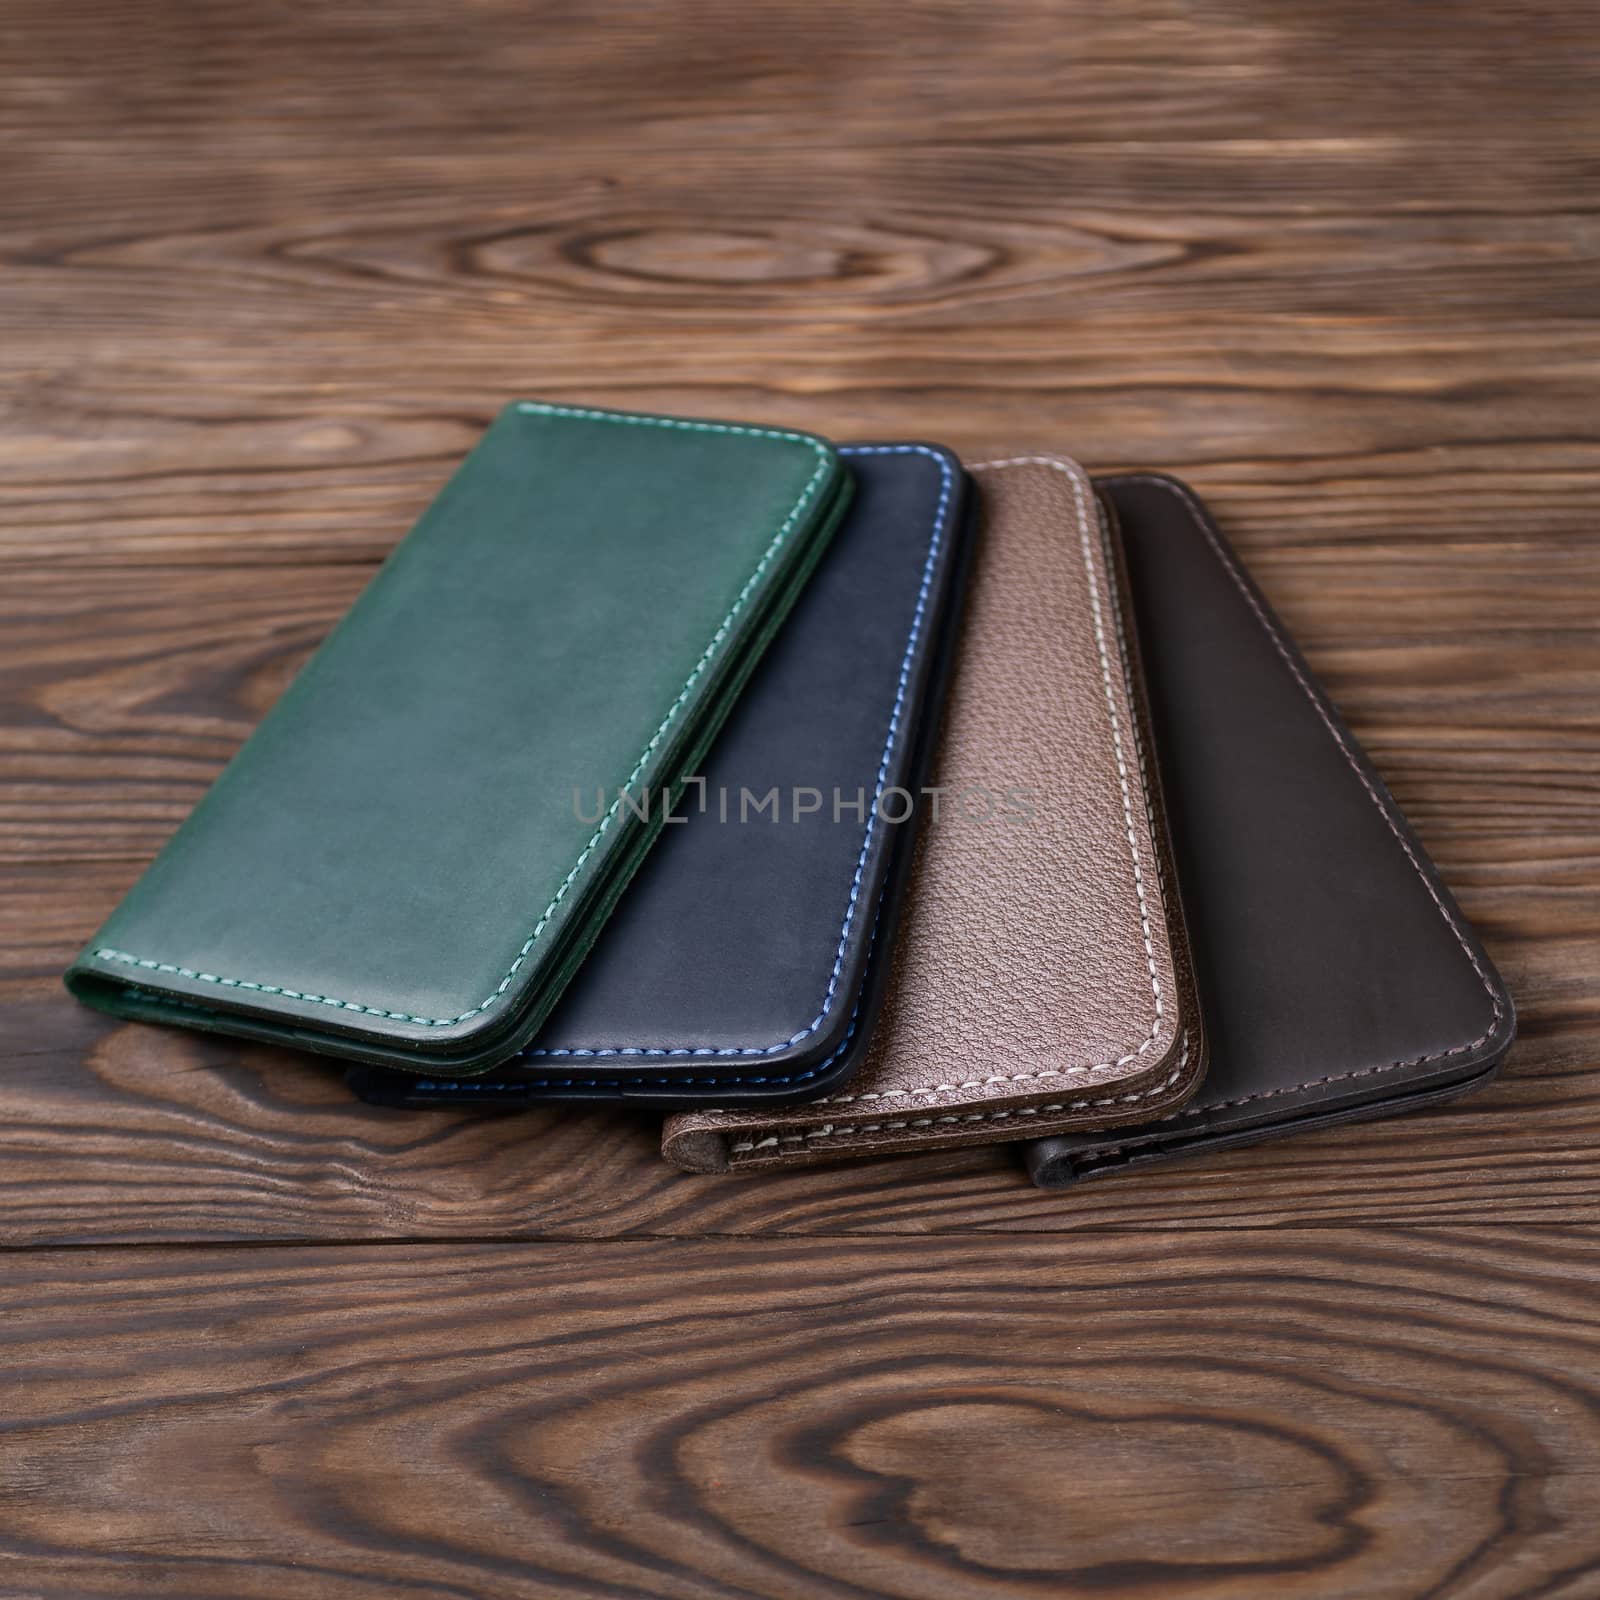 Four handmade leather porte-monnaie on wooden textured background. Side view. Stock photo of luxury accessories.